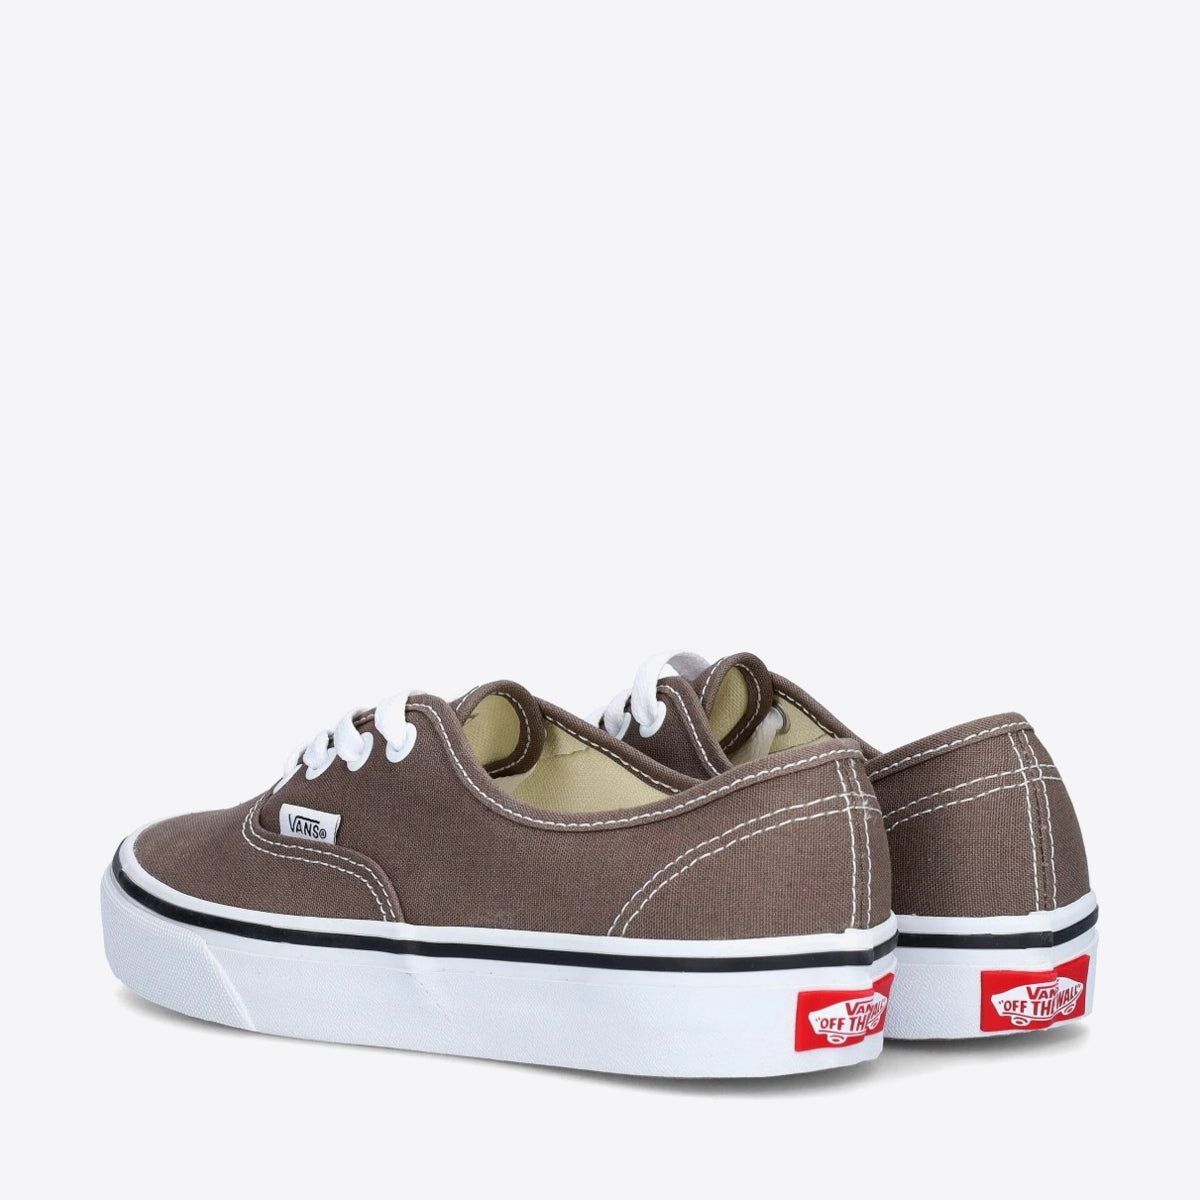 VANS Authentic Colour Theory Bungee Cord - Image 10